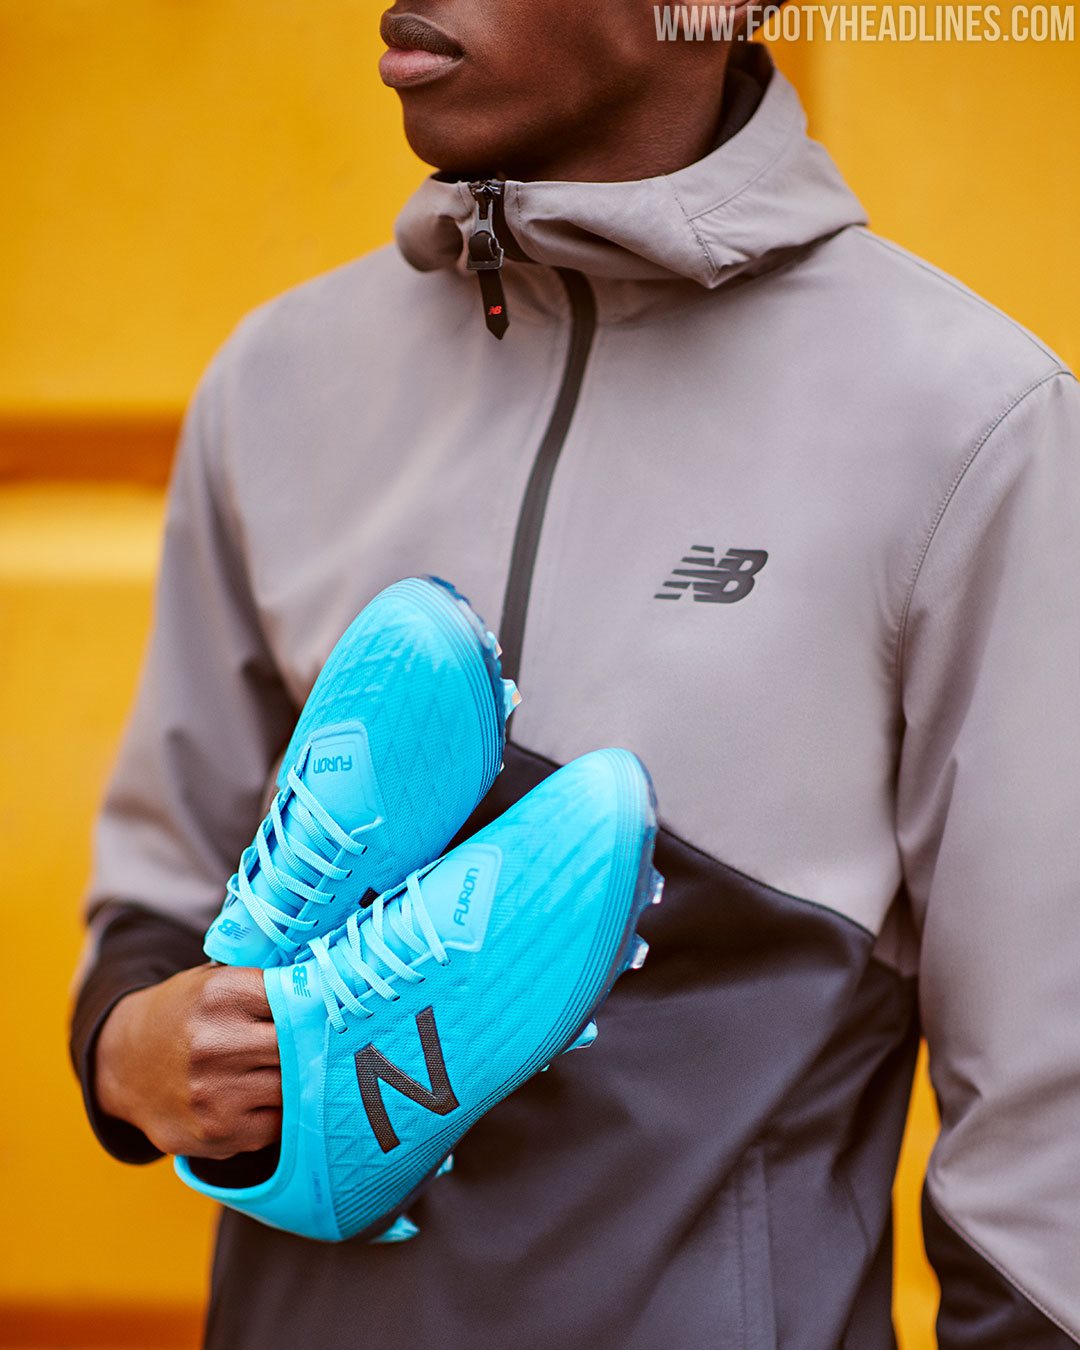 vértice Confirmación Psicológico New Boots for Sadio Mané - 'Bayside / Supercell' New Balance Furon 5 Boots  Released - Footy Headlines